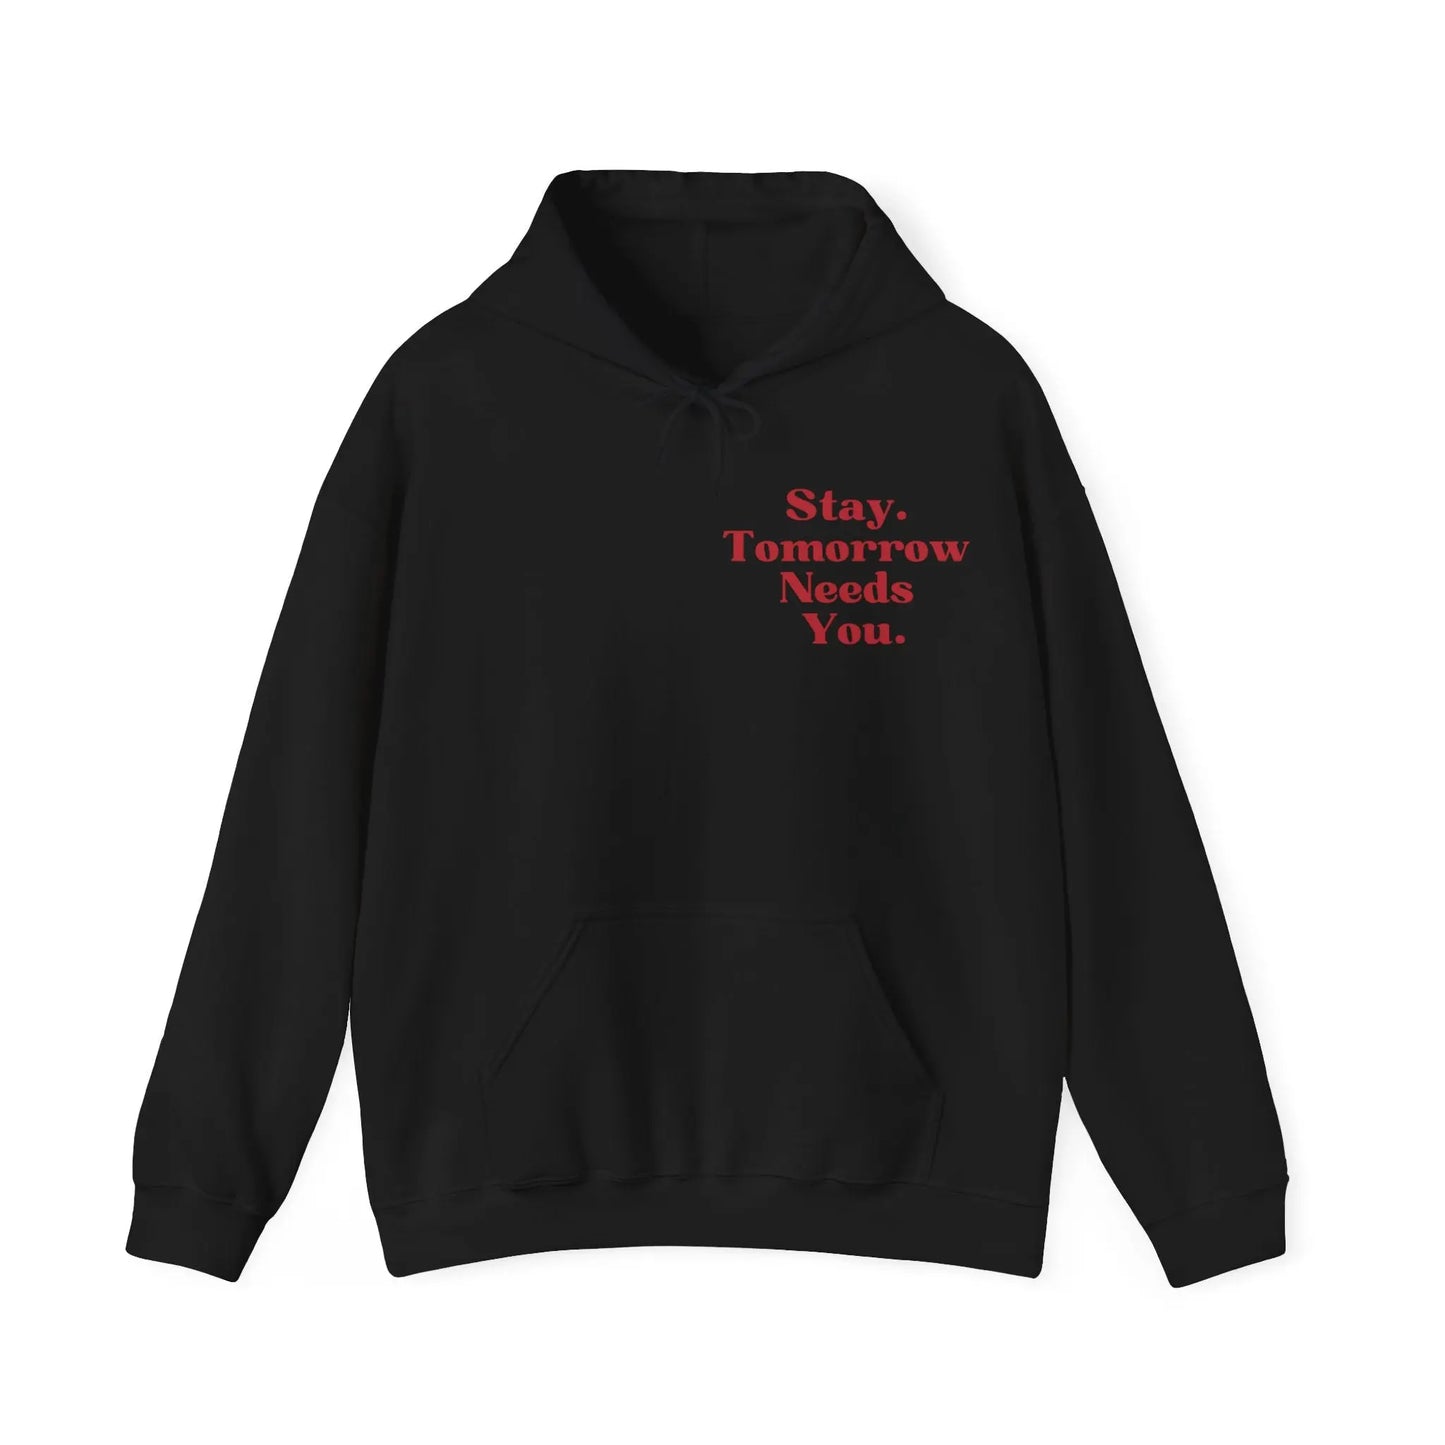 Suicide Awareness To the Person Behind Me: Stay Tomorrow Needs You Hoodie Printify